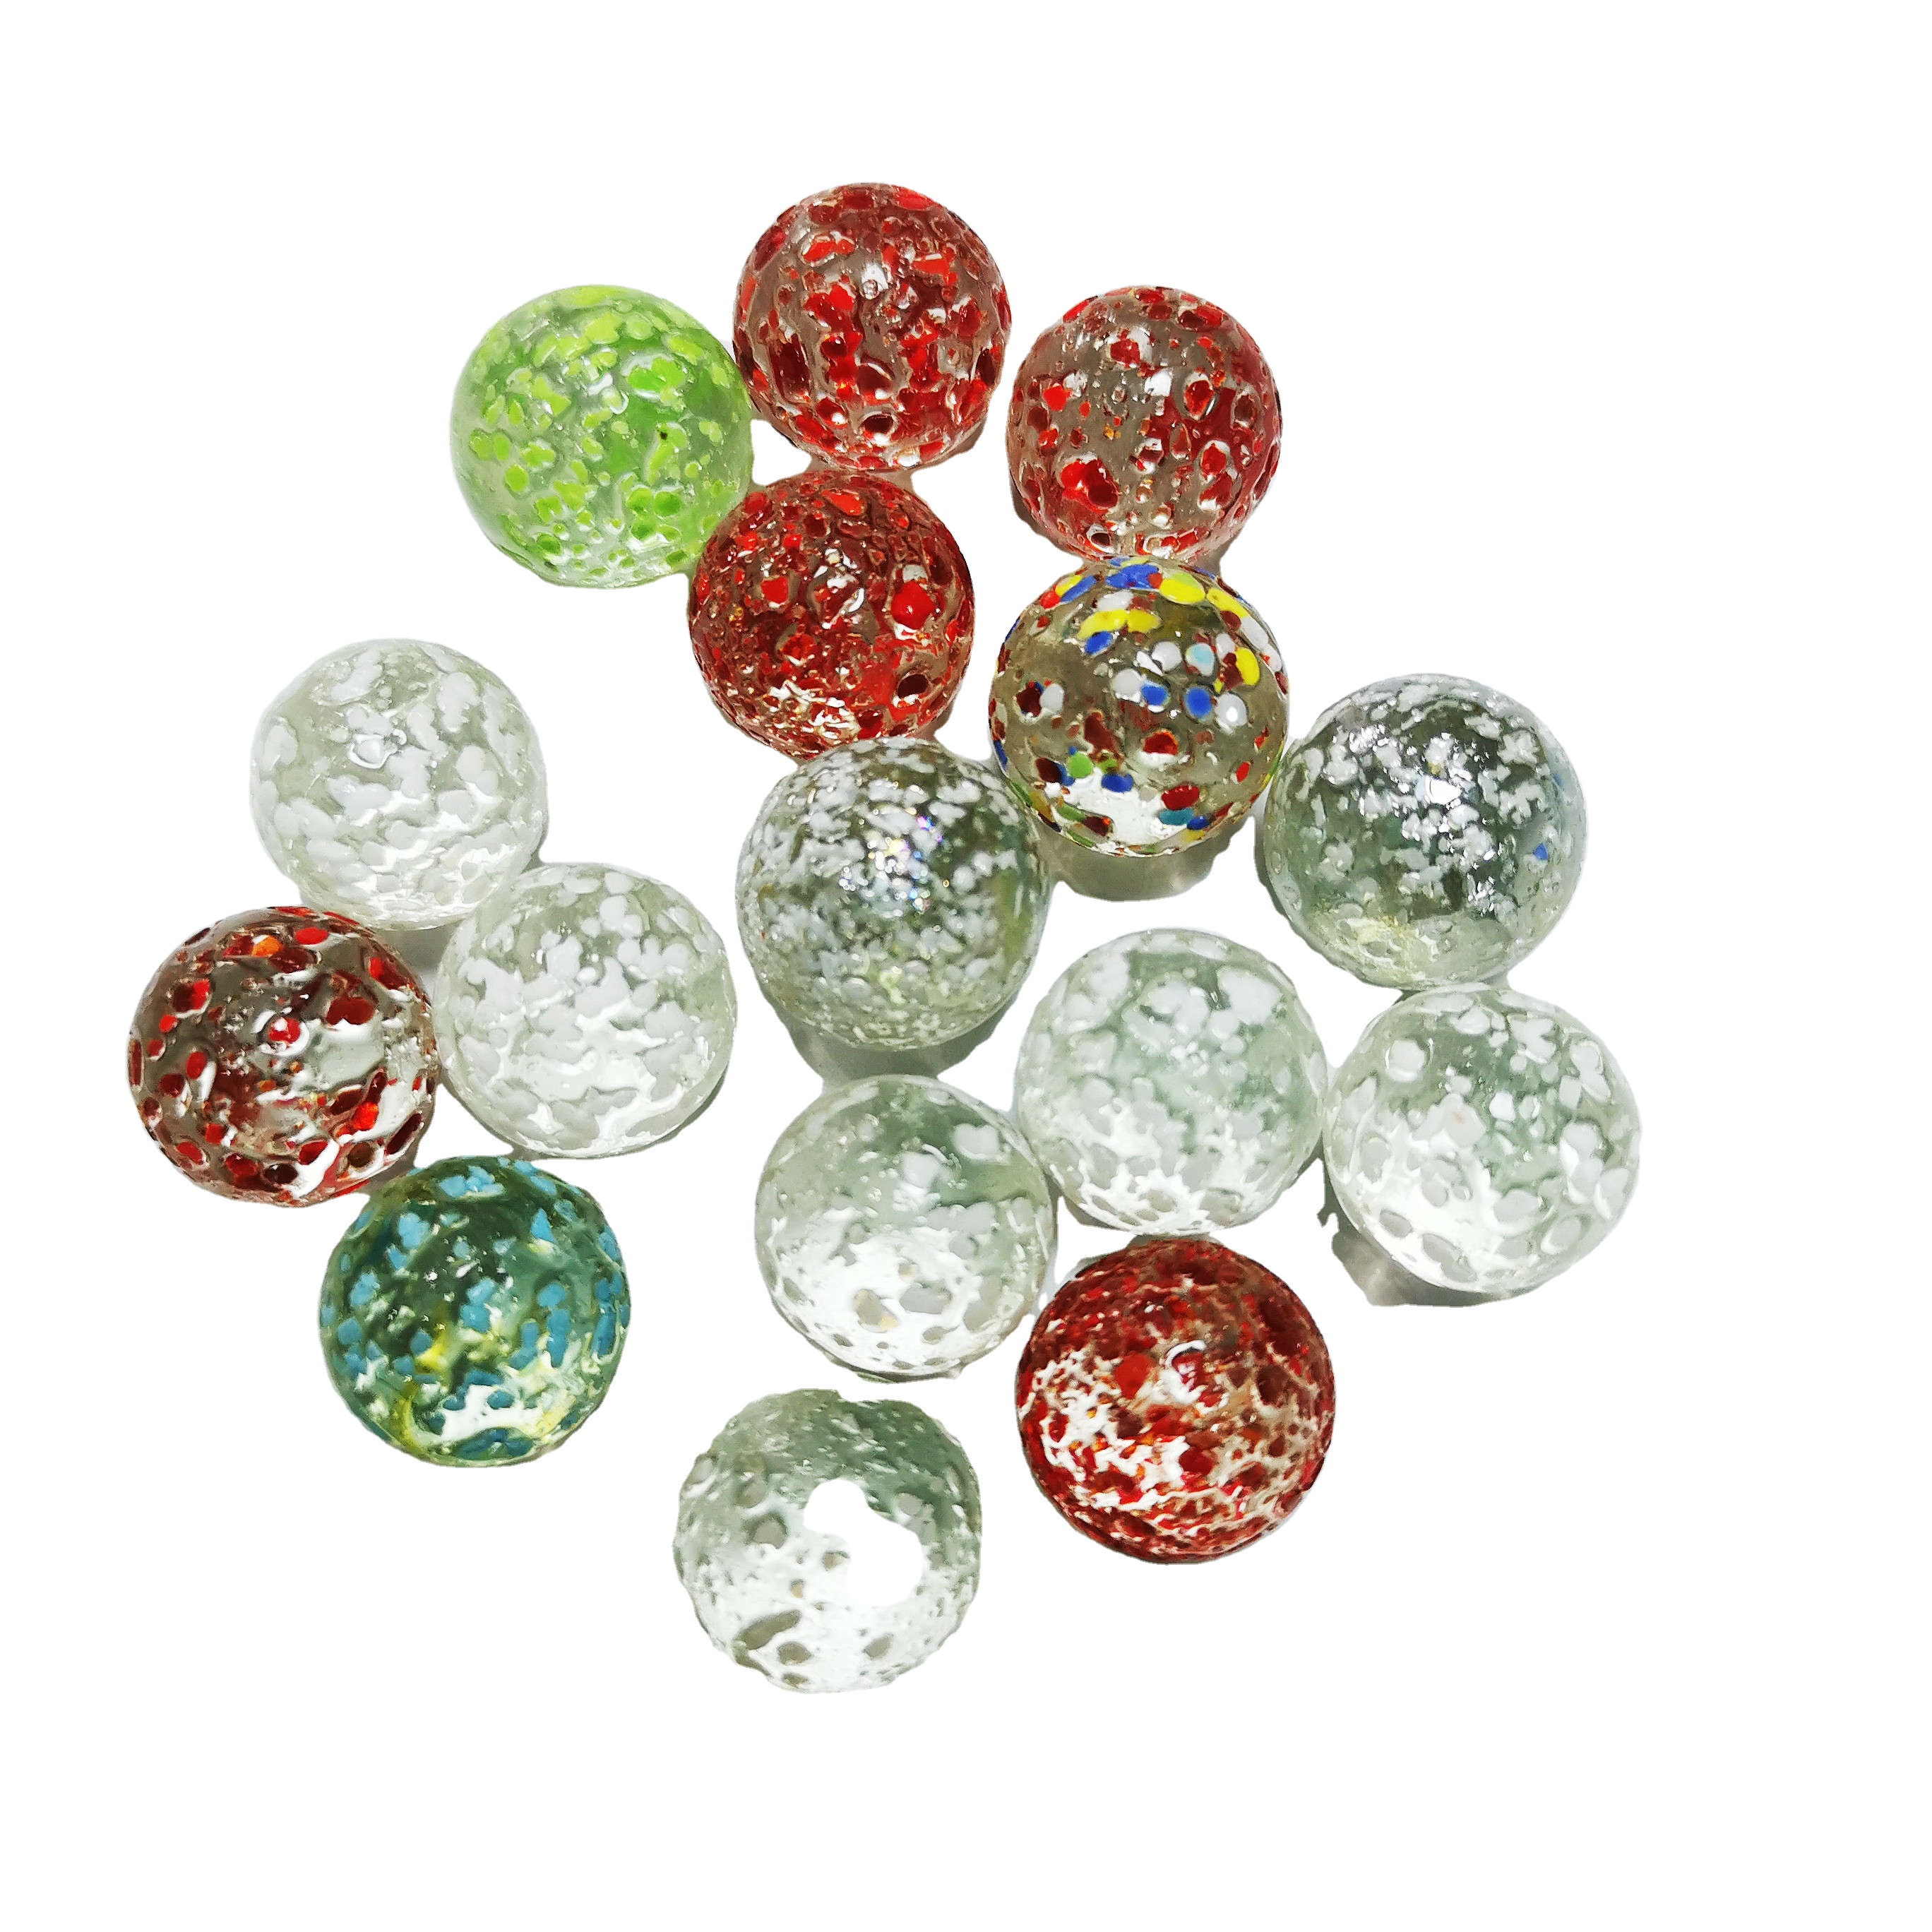 OEM/ODM Supplier Glass Bead Marbles - Hot sale cheap china 9mm,10mm,11mm,12mm,13mm,14mm,15mm,16mm,17mm,19mm,20mm,22mm,25mm,28mm,30mm,35mm 45mm watermelon glass marble – Chico